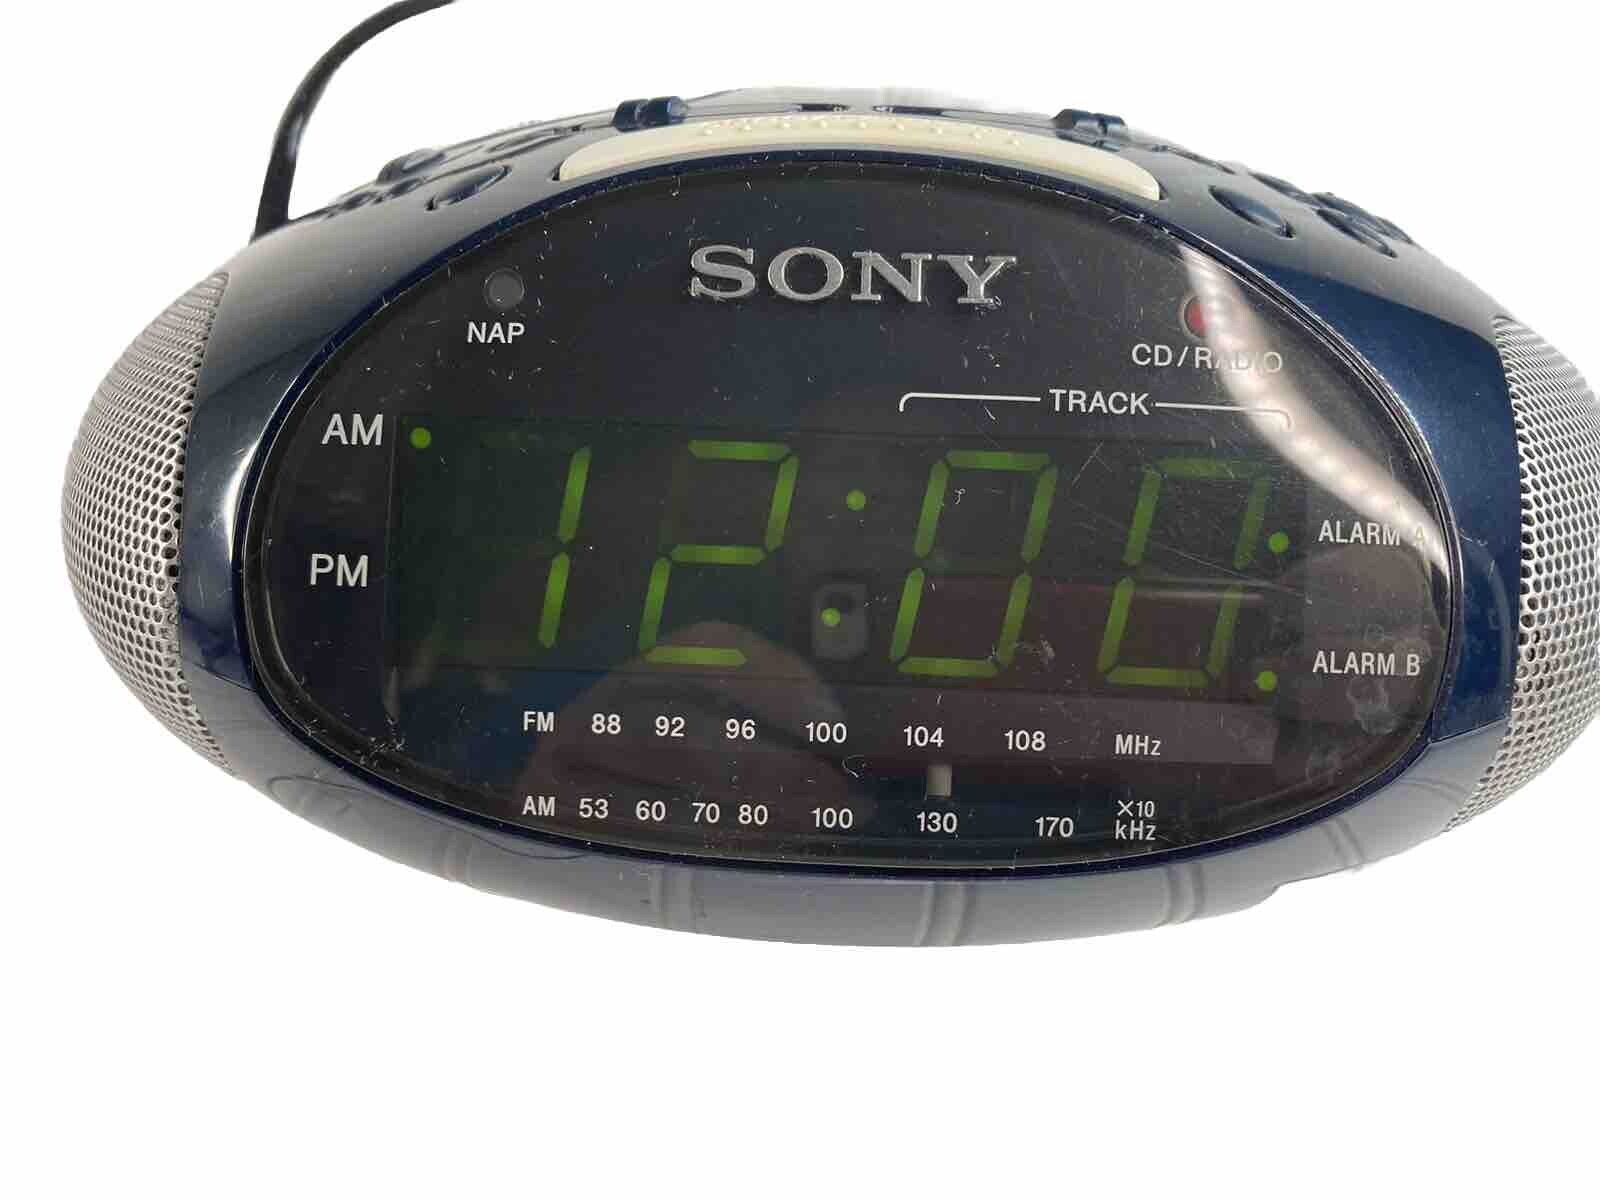 Sony ICF-CD831 CD Player Alarm Clock-AM/FM-Blue-Corded-Tested All Works